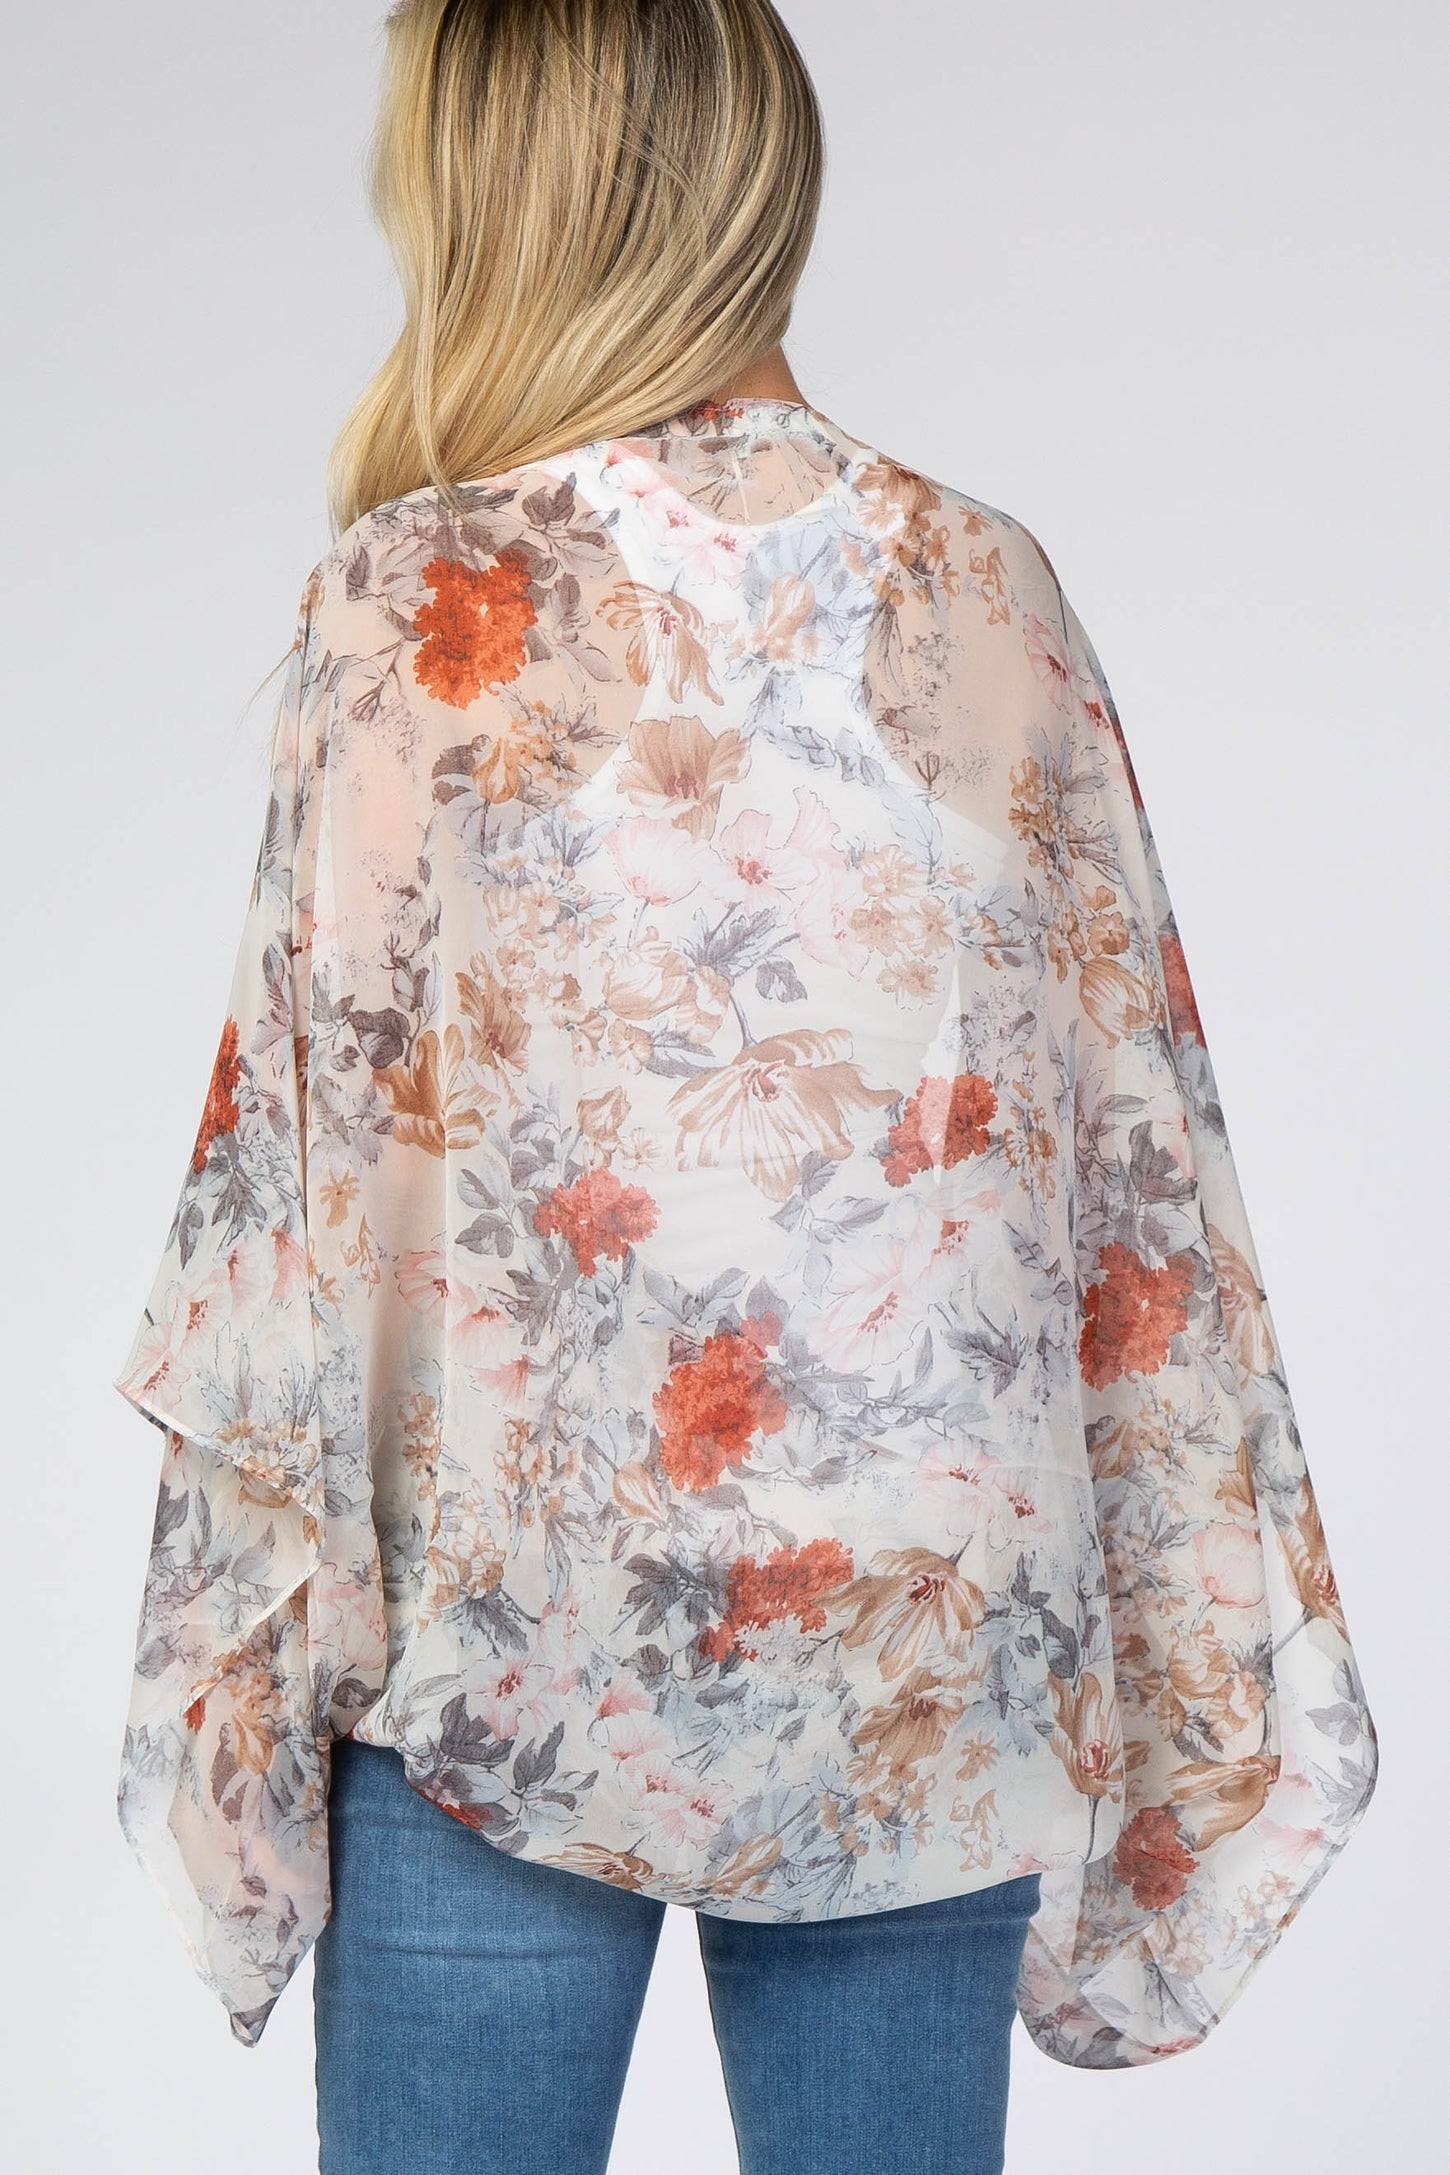 White Floral Chiffon Dolman Sleeve Maternity Cover Up– PinkBlush